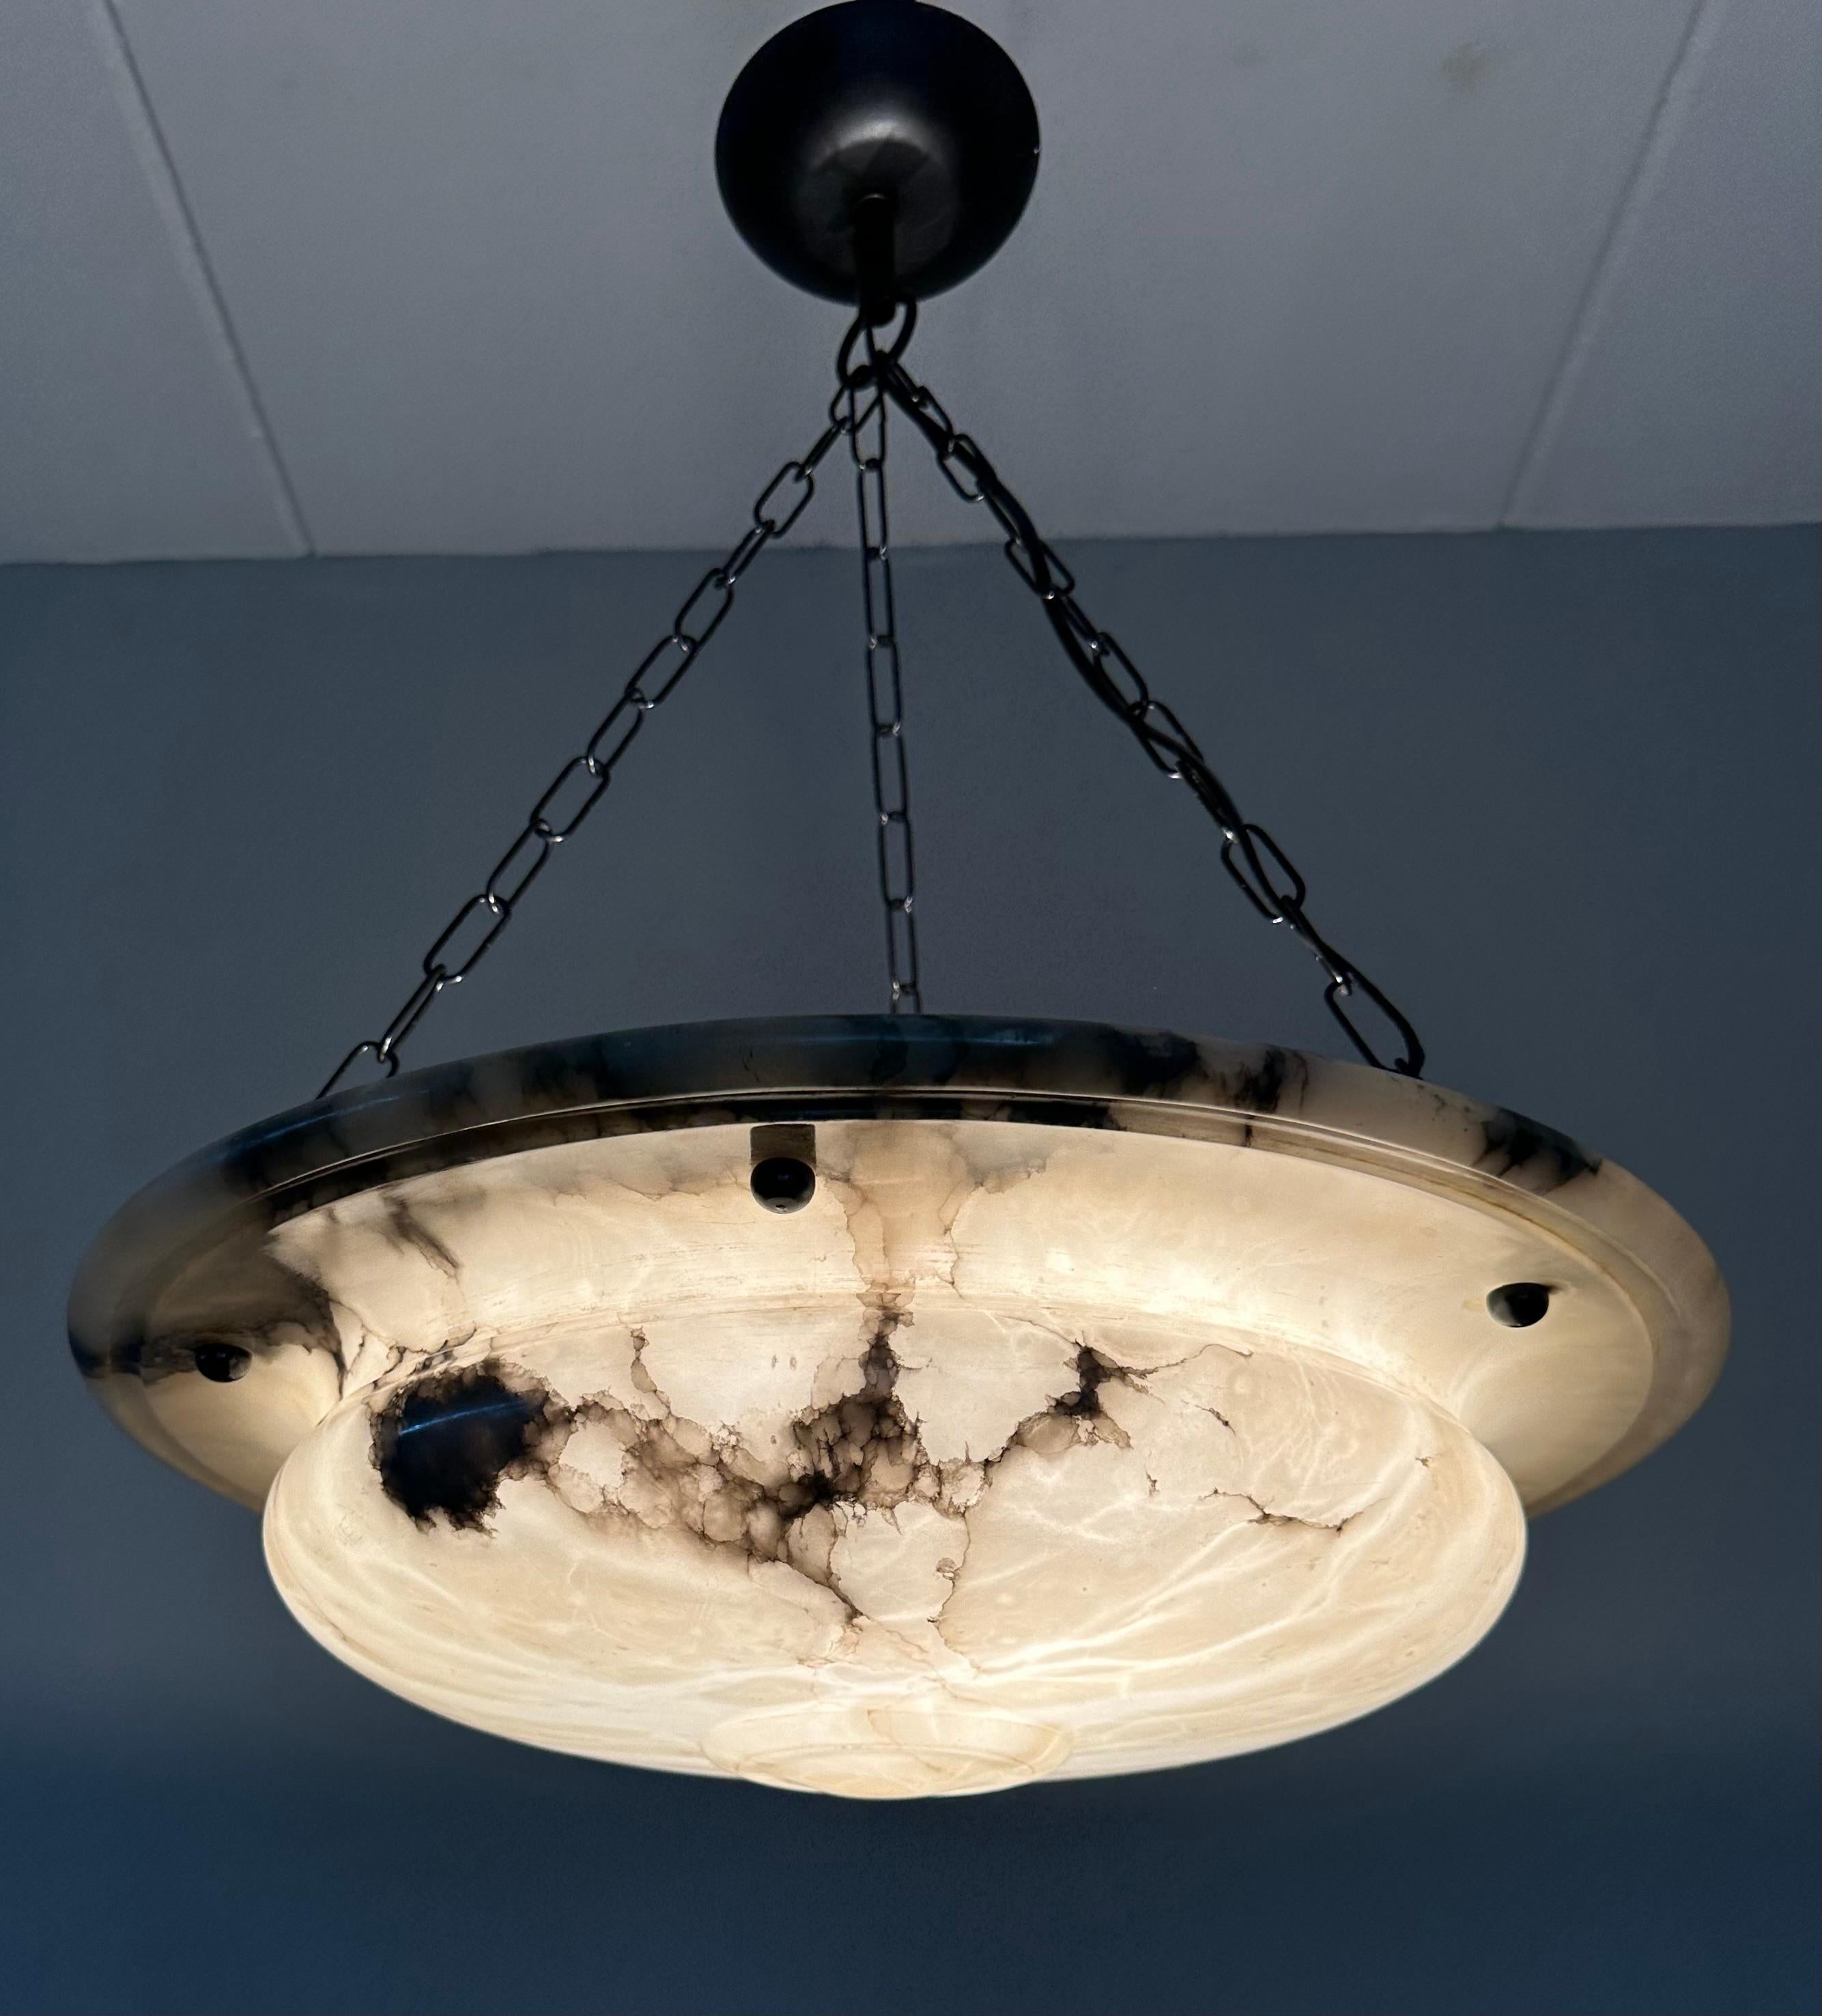 Stunning design and large size, 19,3 inches in diameter antique alabaster light fixture.

Thanks to its large size and elegant design this beautiful alabaster chandelier from the European Jugendstil era is bound to light up someone's days and